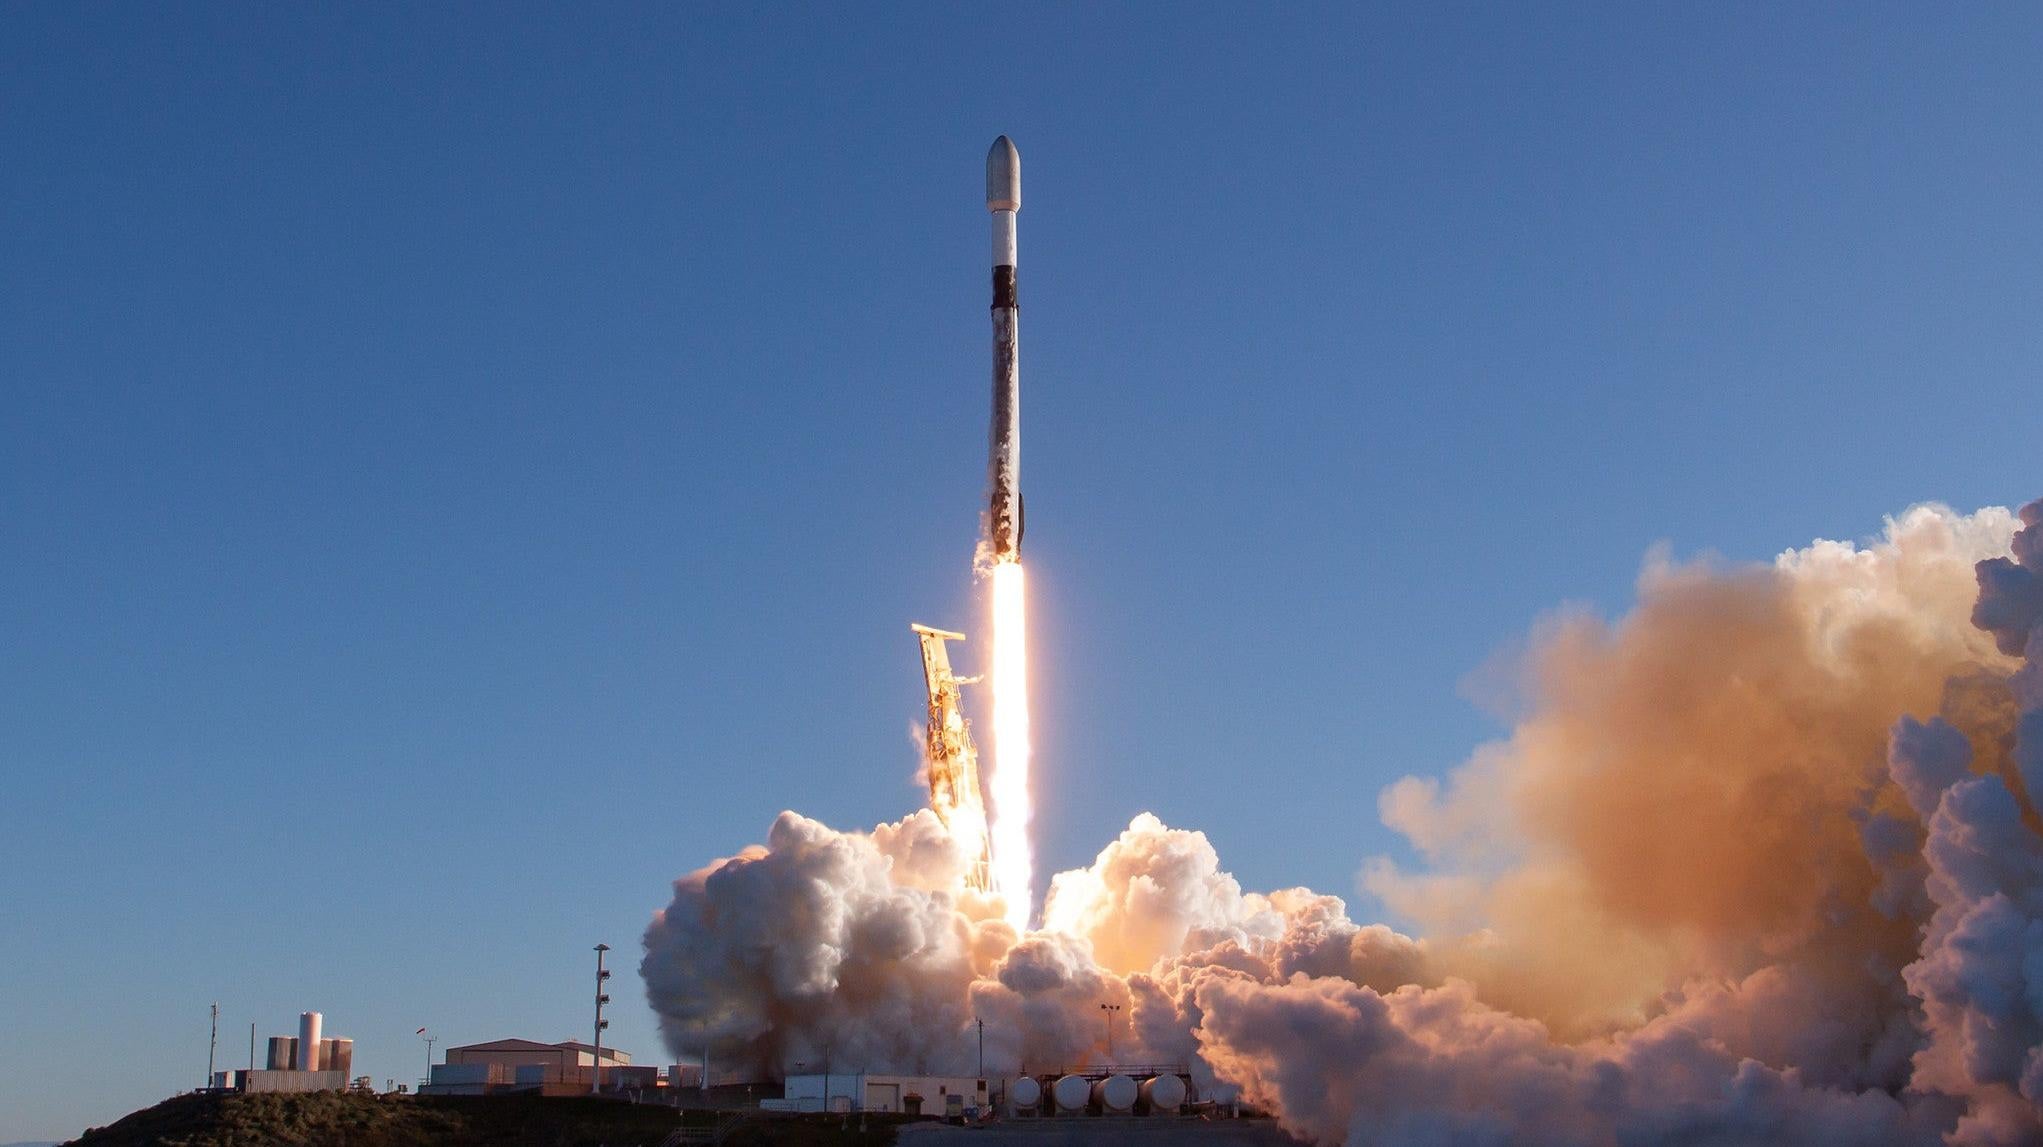 A Falcon 9 rocket launching Starlinks to orbit, January 31, 2023. (Photo: SpaceX)